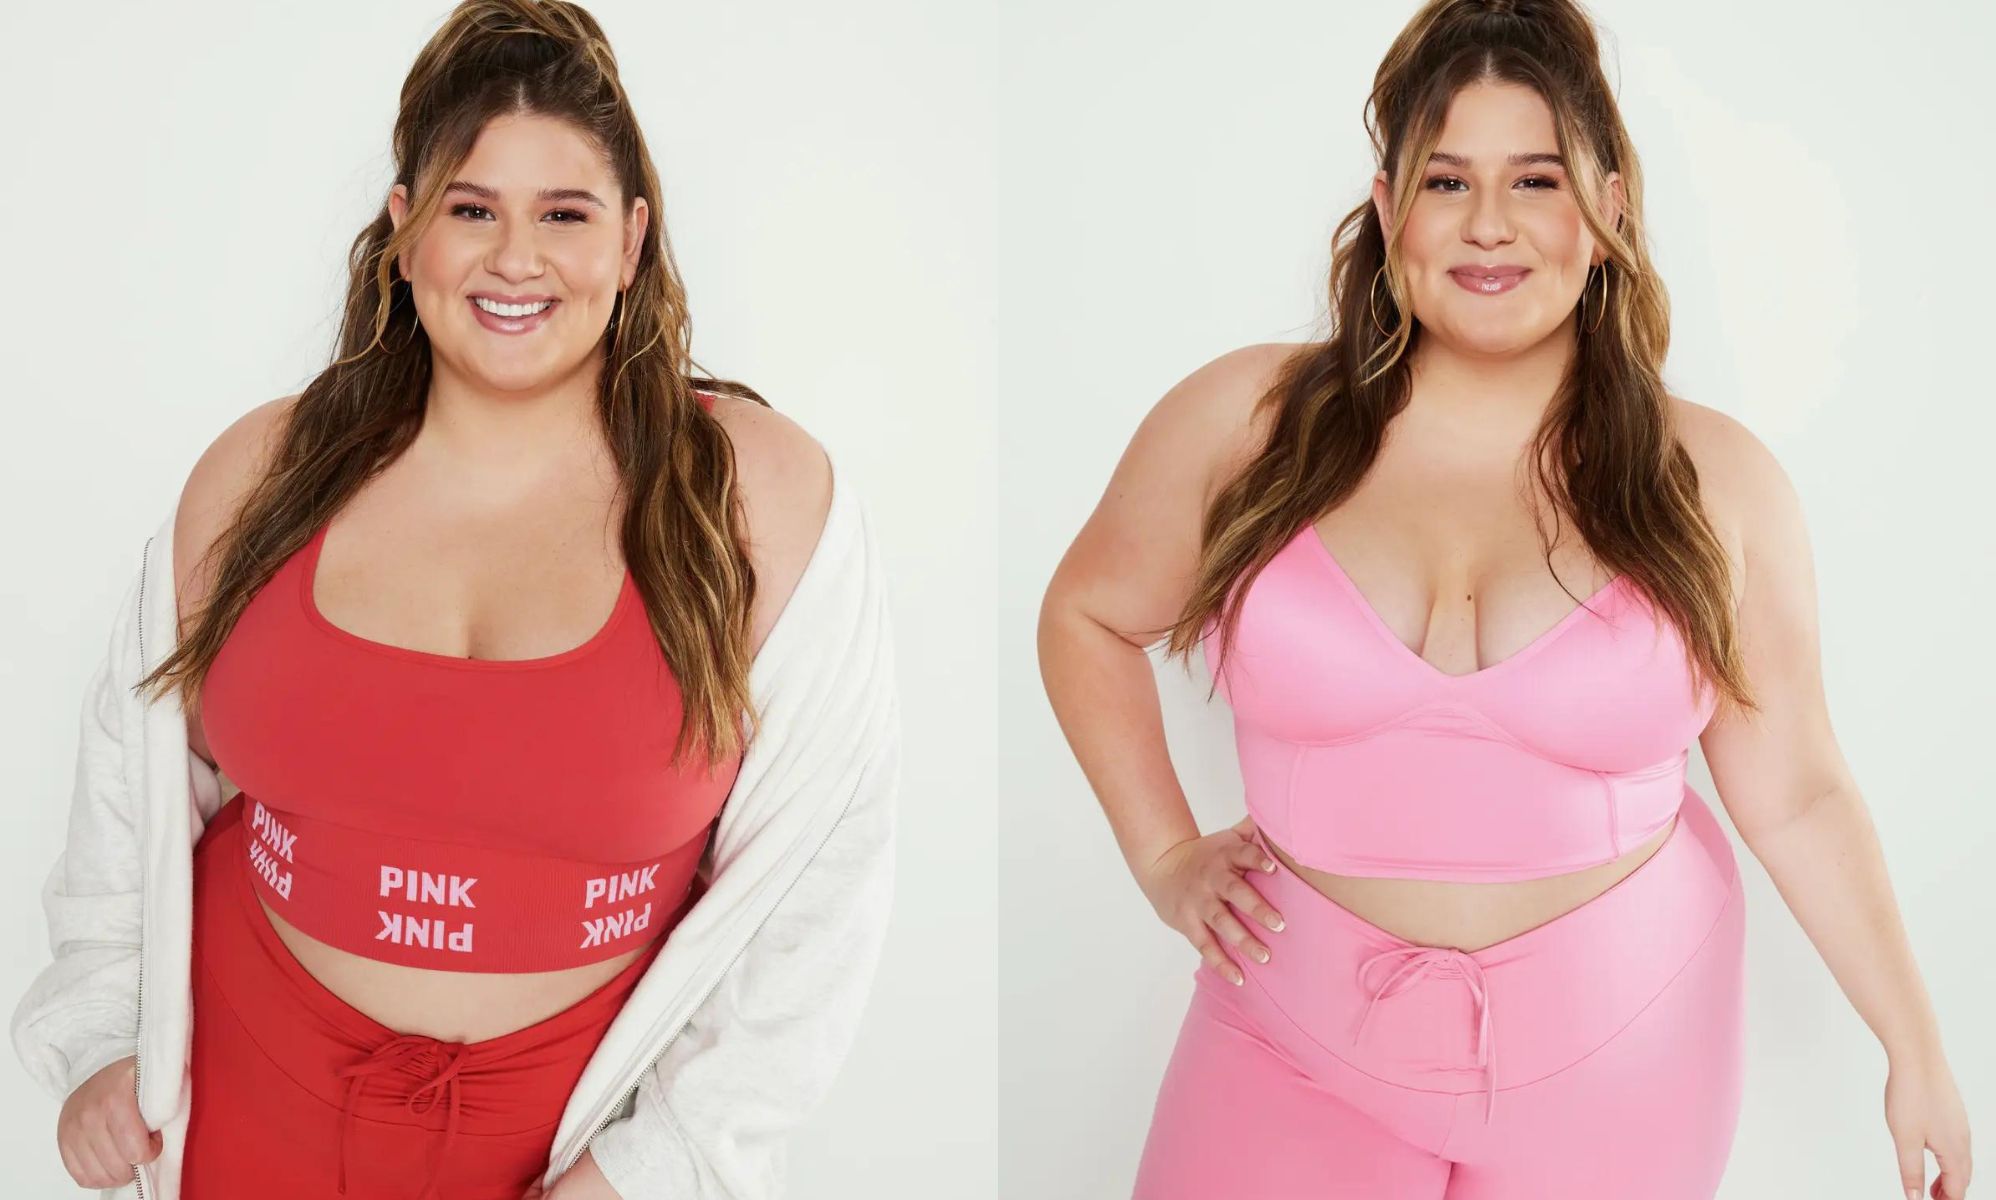 Brother Models Curve Board Celebrates Plus-Size Beauty